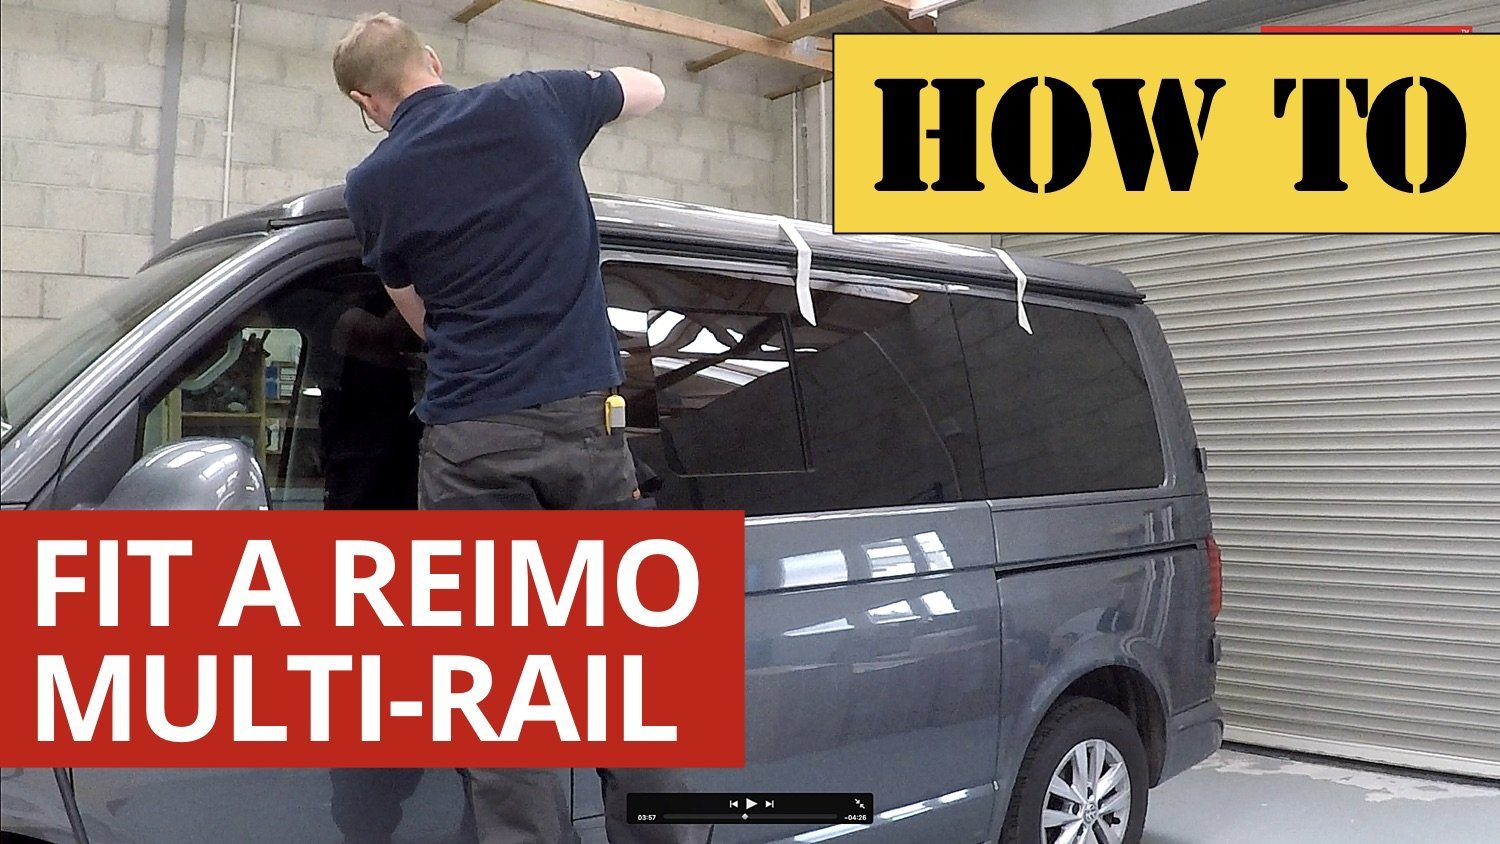 Video: How to Fit a Reimo Multirail